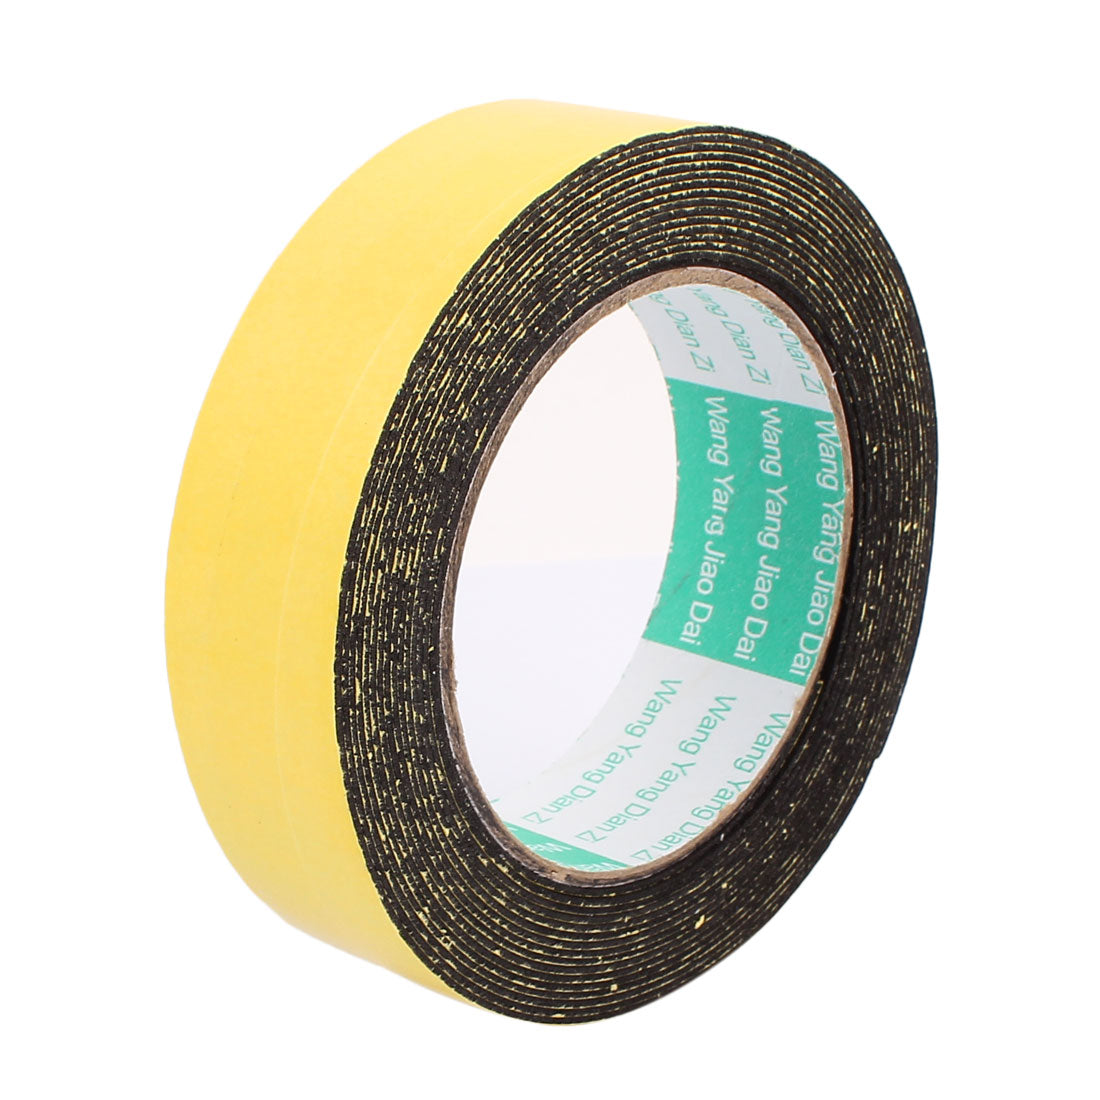 uxcell Uxcell 2Pcs 30mm x 1mm Single Sided Self Adhesive Shockproof Sponge Foam Tape 5M Length